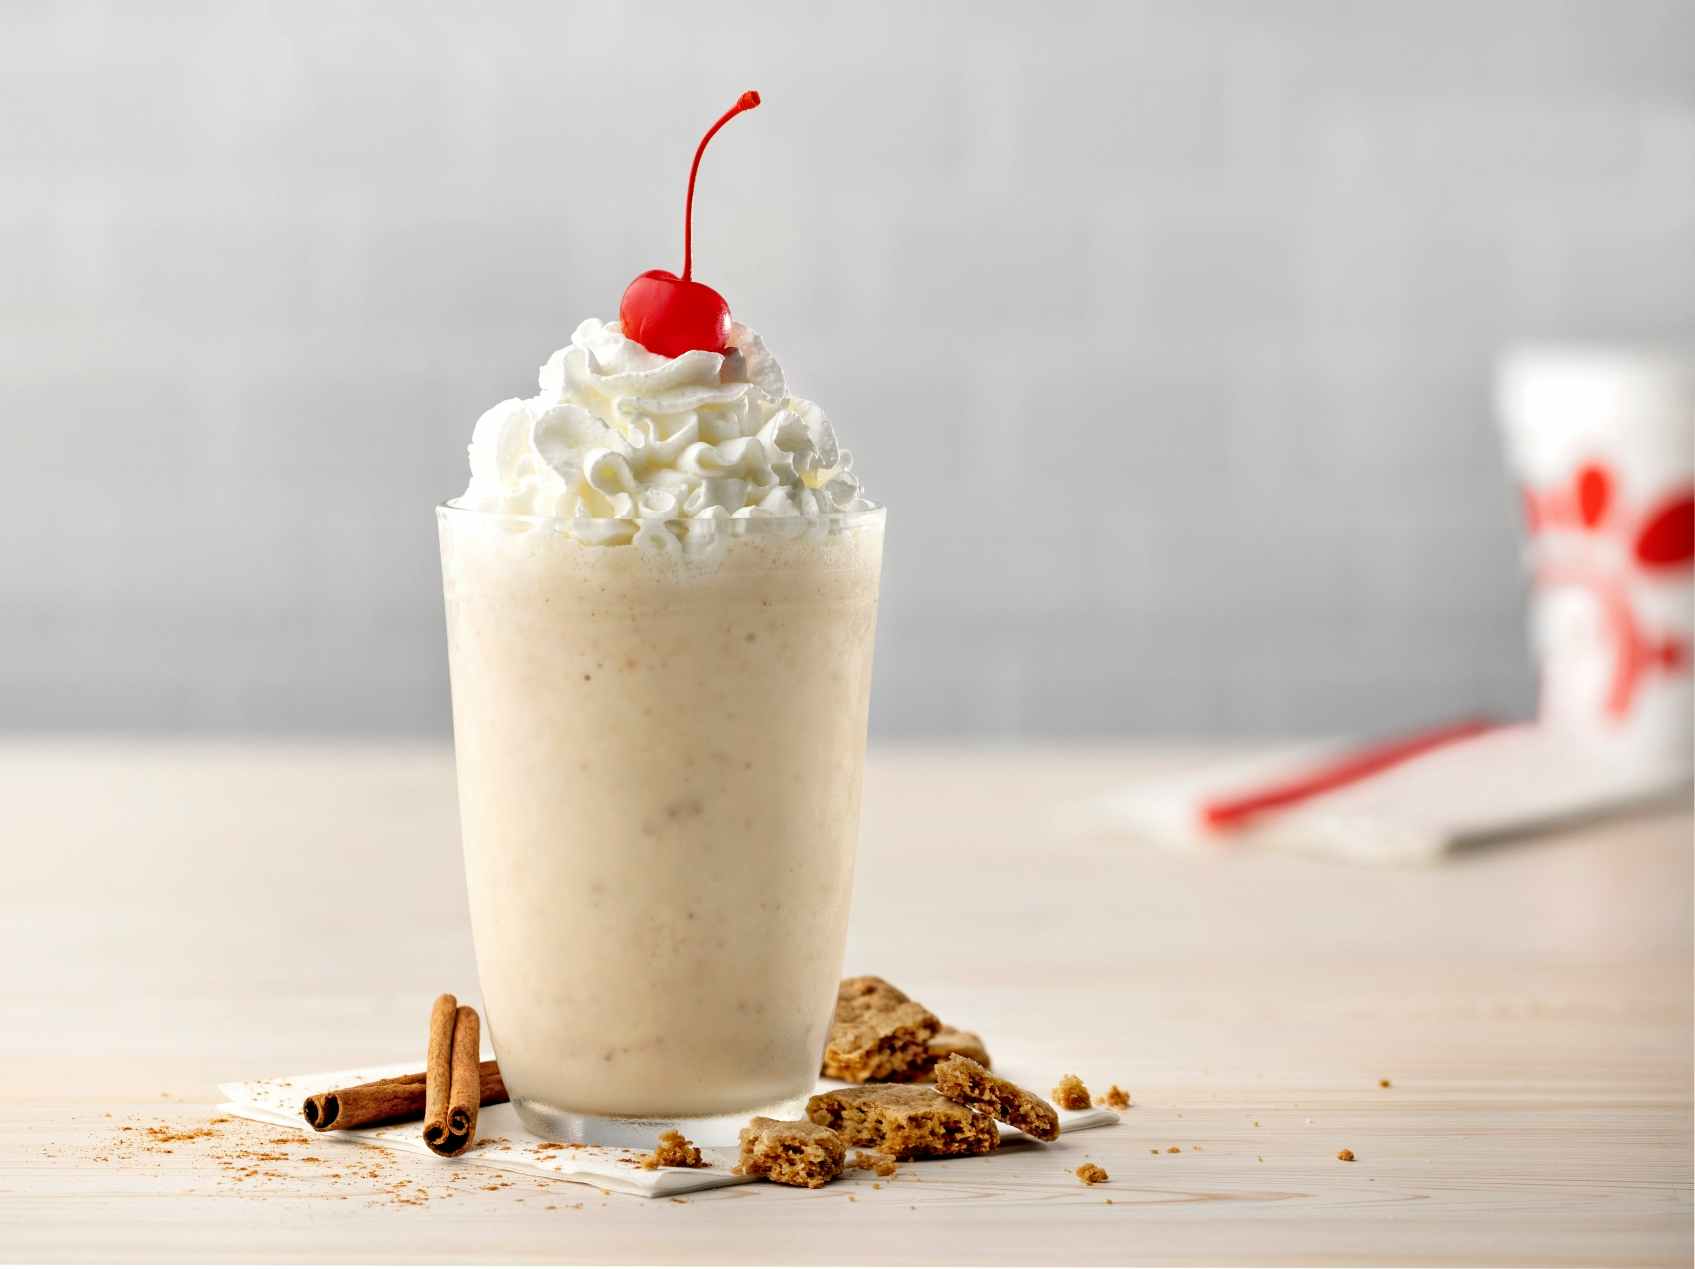 A Chick-fil-A Autumn Spice Milkshake with whipped cream and a cherry on top with cinnamon sticks and cookie crumbles on the table next to it.